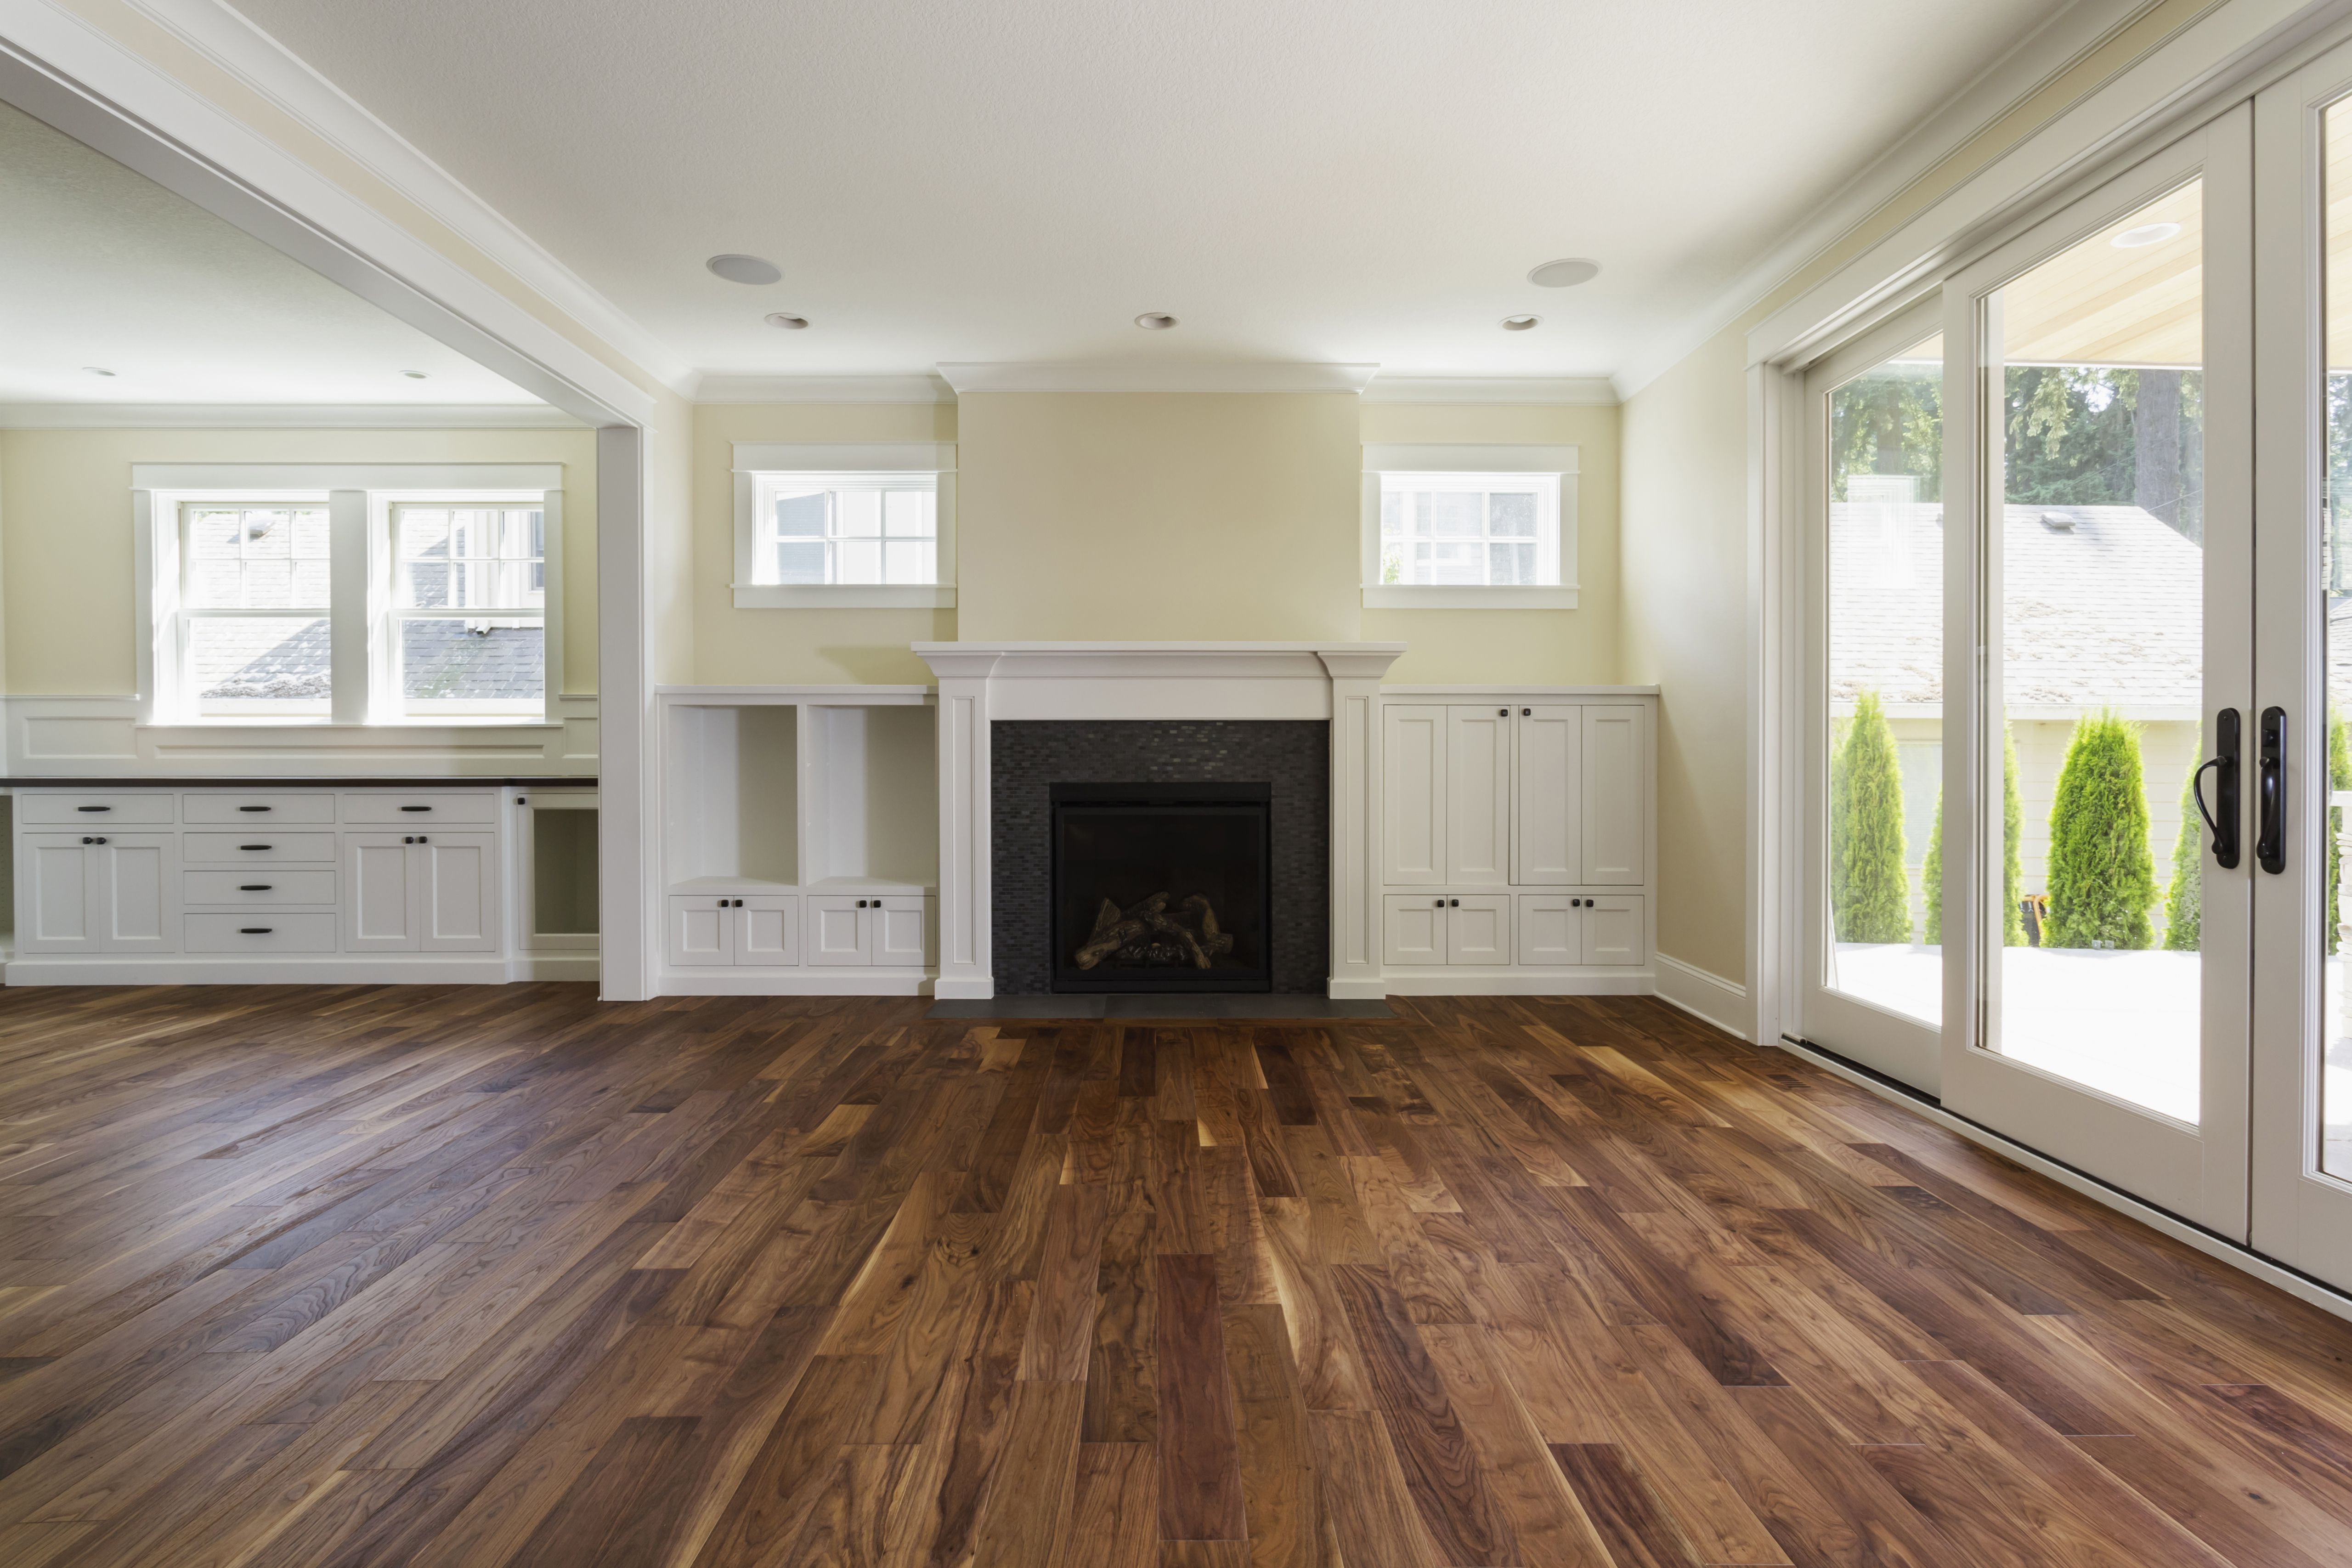 19 Fashionable How to Fix Scratches On Hardwood Floors 2022 free download how to fix scratches on hardwood floors of the pros and cons of prefinished hardwood flooring inside fireplace and built in shelves in living room 482143011 57bef8e33df78cc16e035397